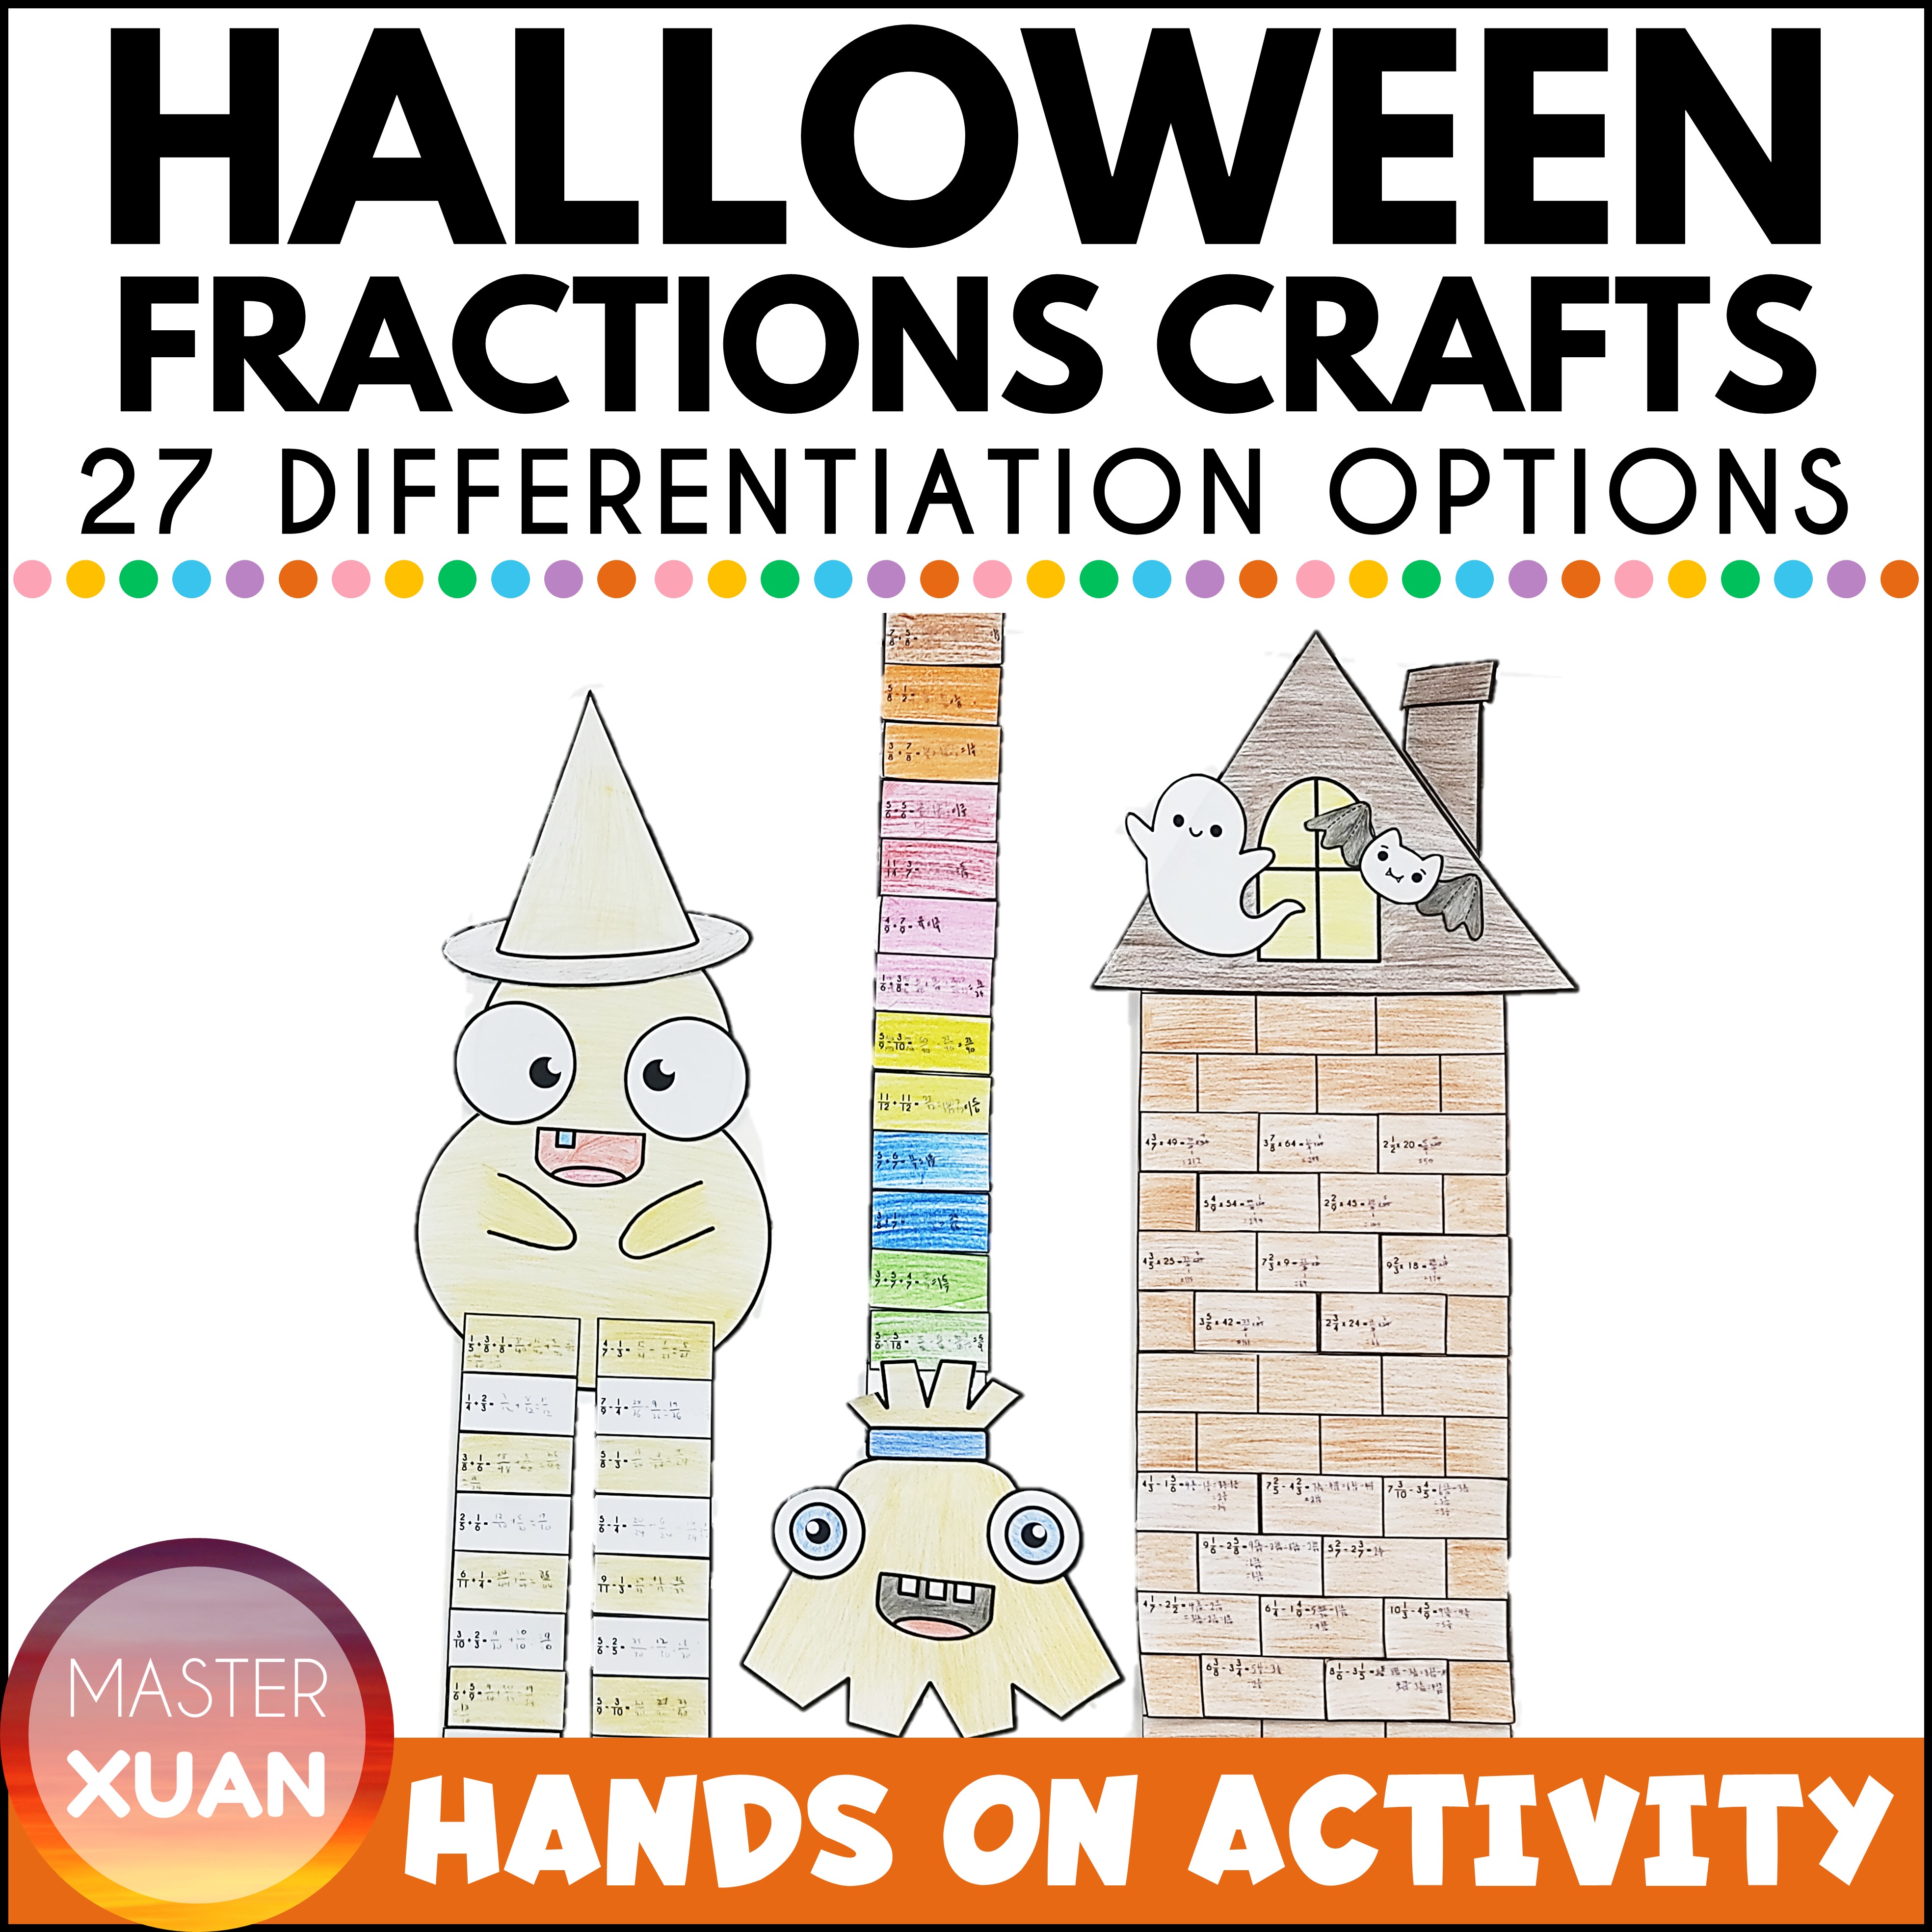 Fraction paper craft (haunted tower, magic broom and monster) with halloween theme makes this hands on activity great for October!